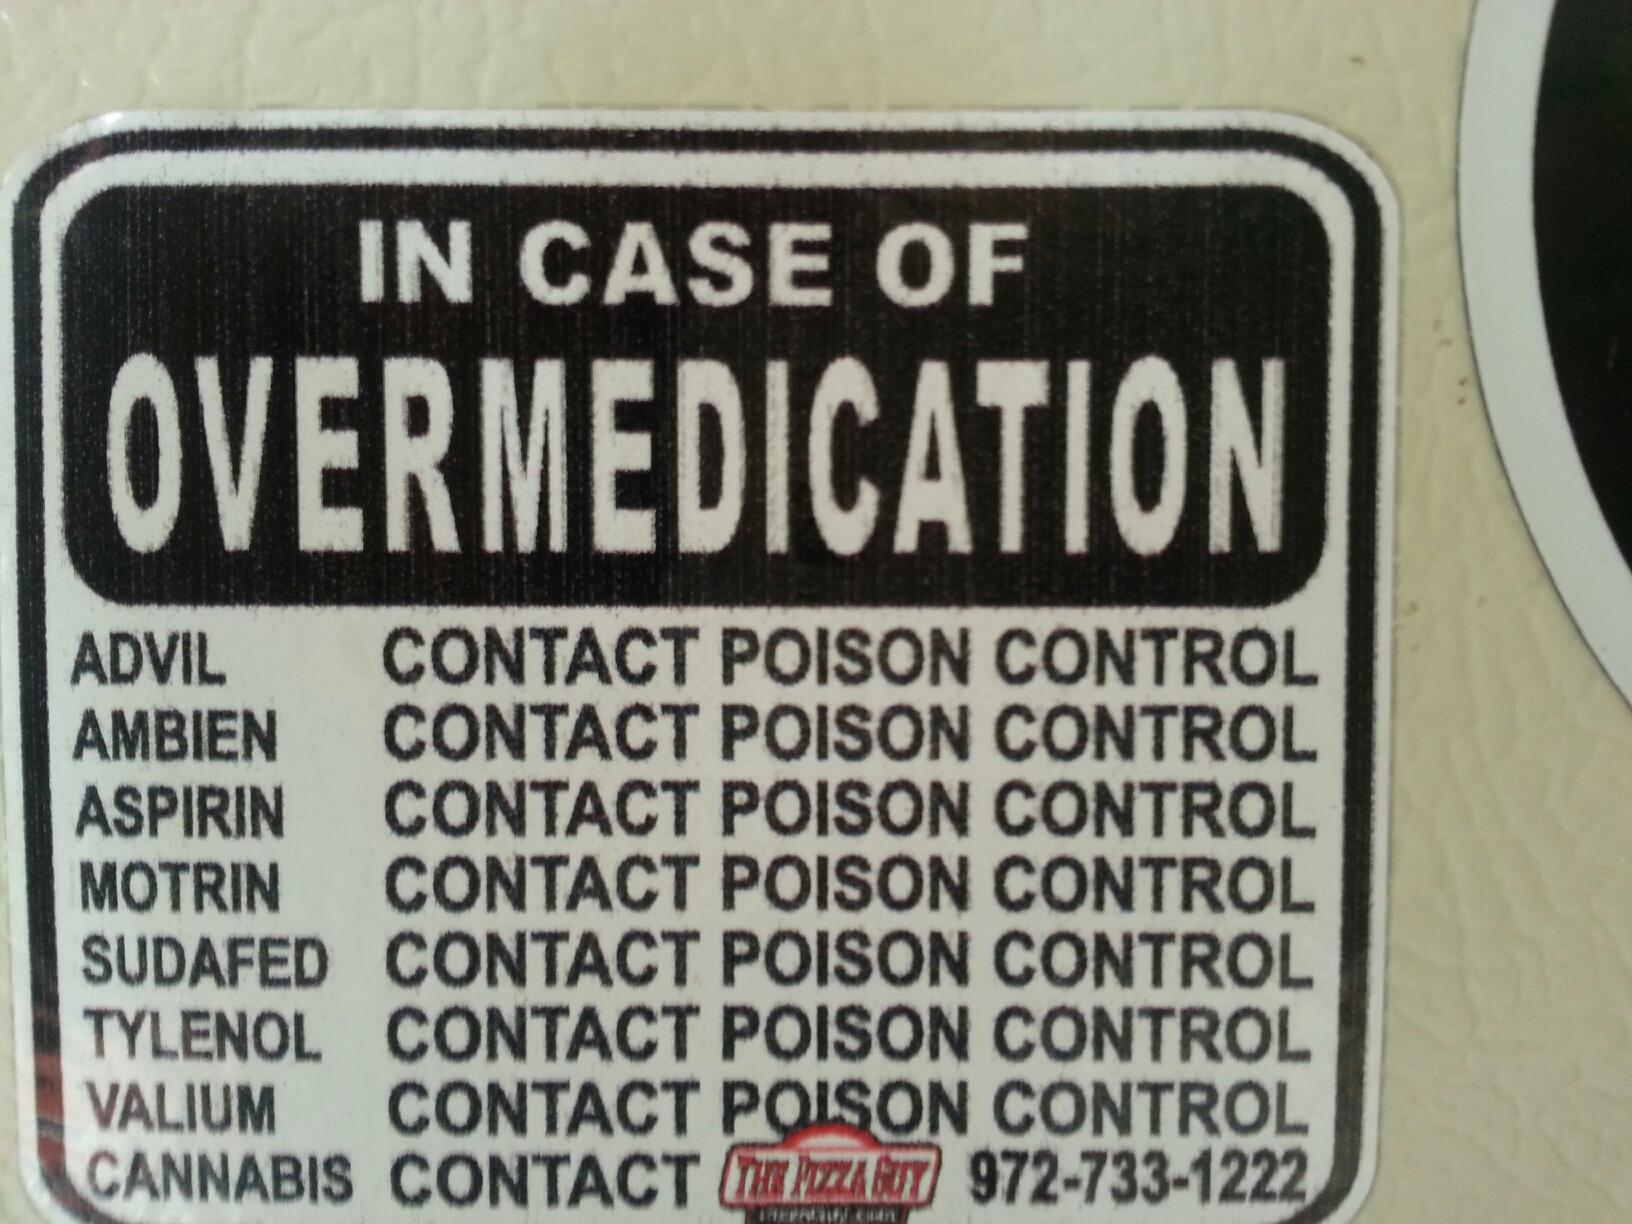 case of overdose - In Case Of Overmedication Advil Contact Poison Control Ambien Contact Poison Control Aspirin Contact Poison Control Motrin Contact Poison Control Sudafed Contact Poison Control Tylenol Contact Poison Control Valium Contact Poison Contro